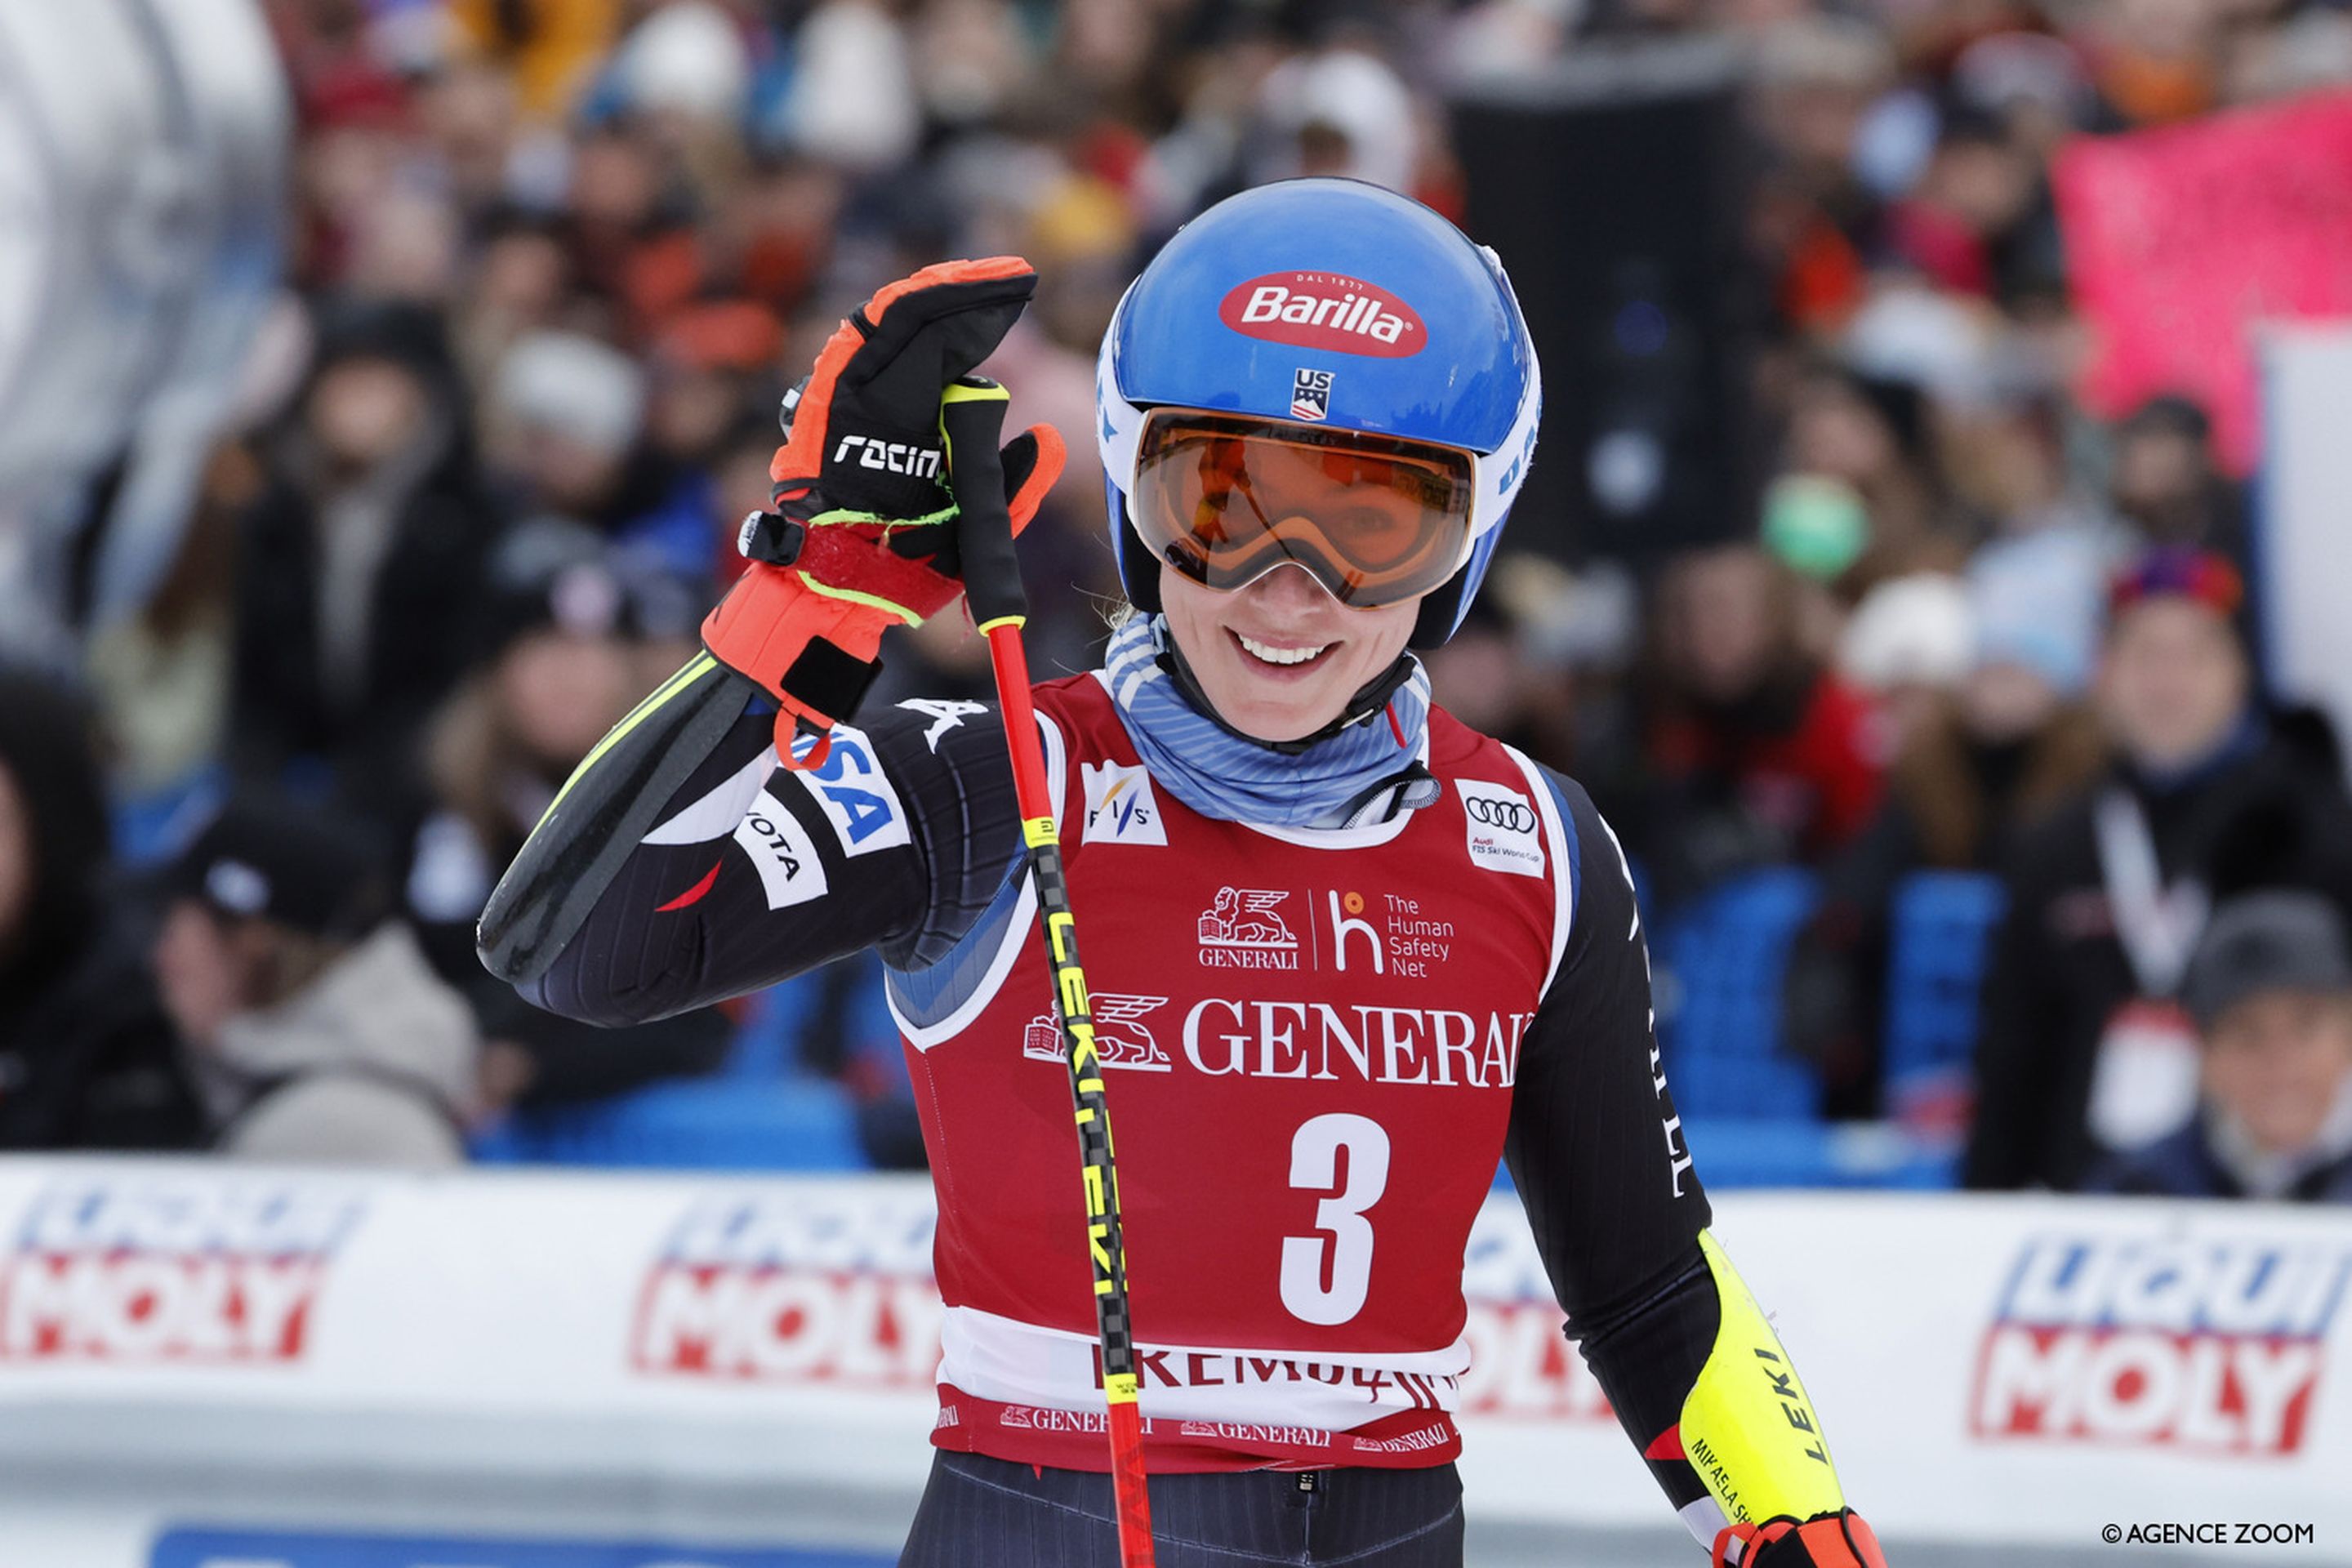 Shiffrin was all smiles after her second run